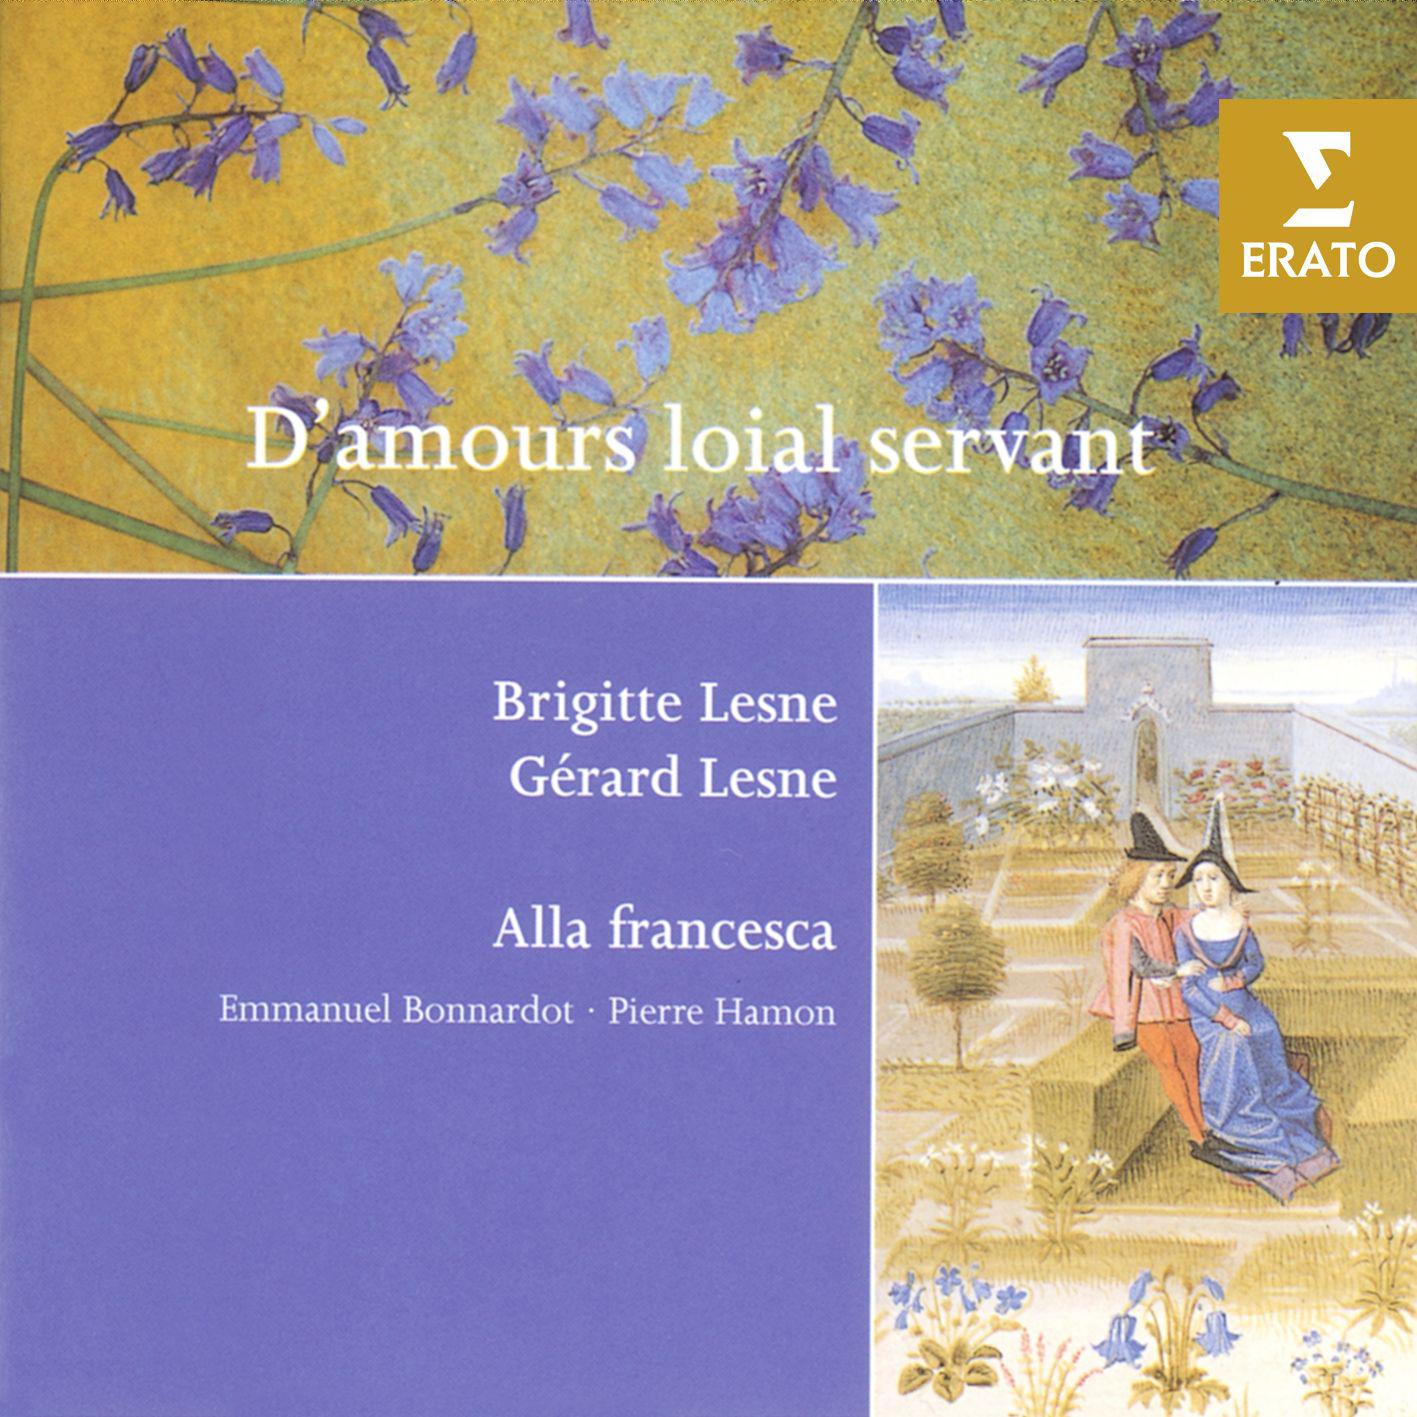 D'Amours loial servant - French and Italian Love Songs of the 14th-15th Centuries